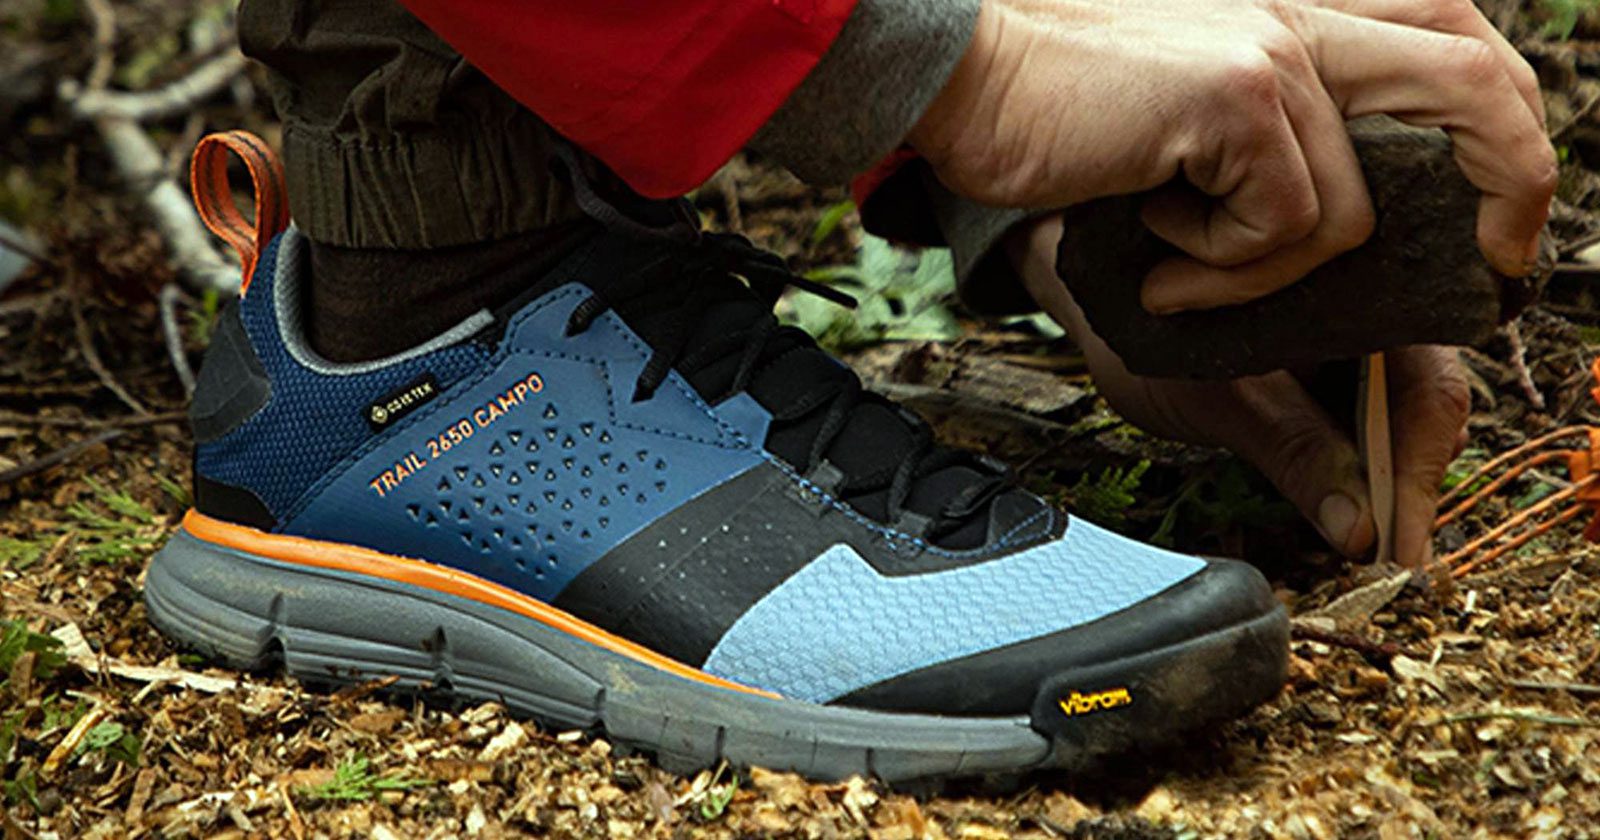 10 Recommendations for Men’s Shoes for Walking